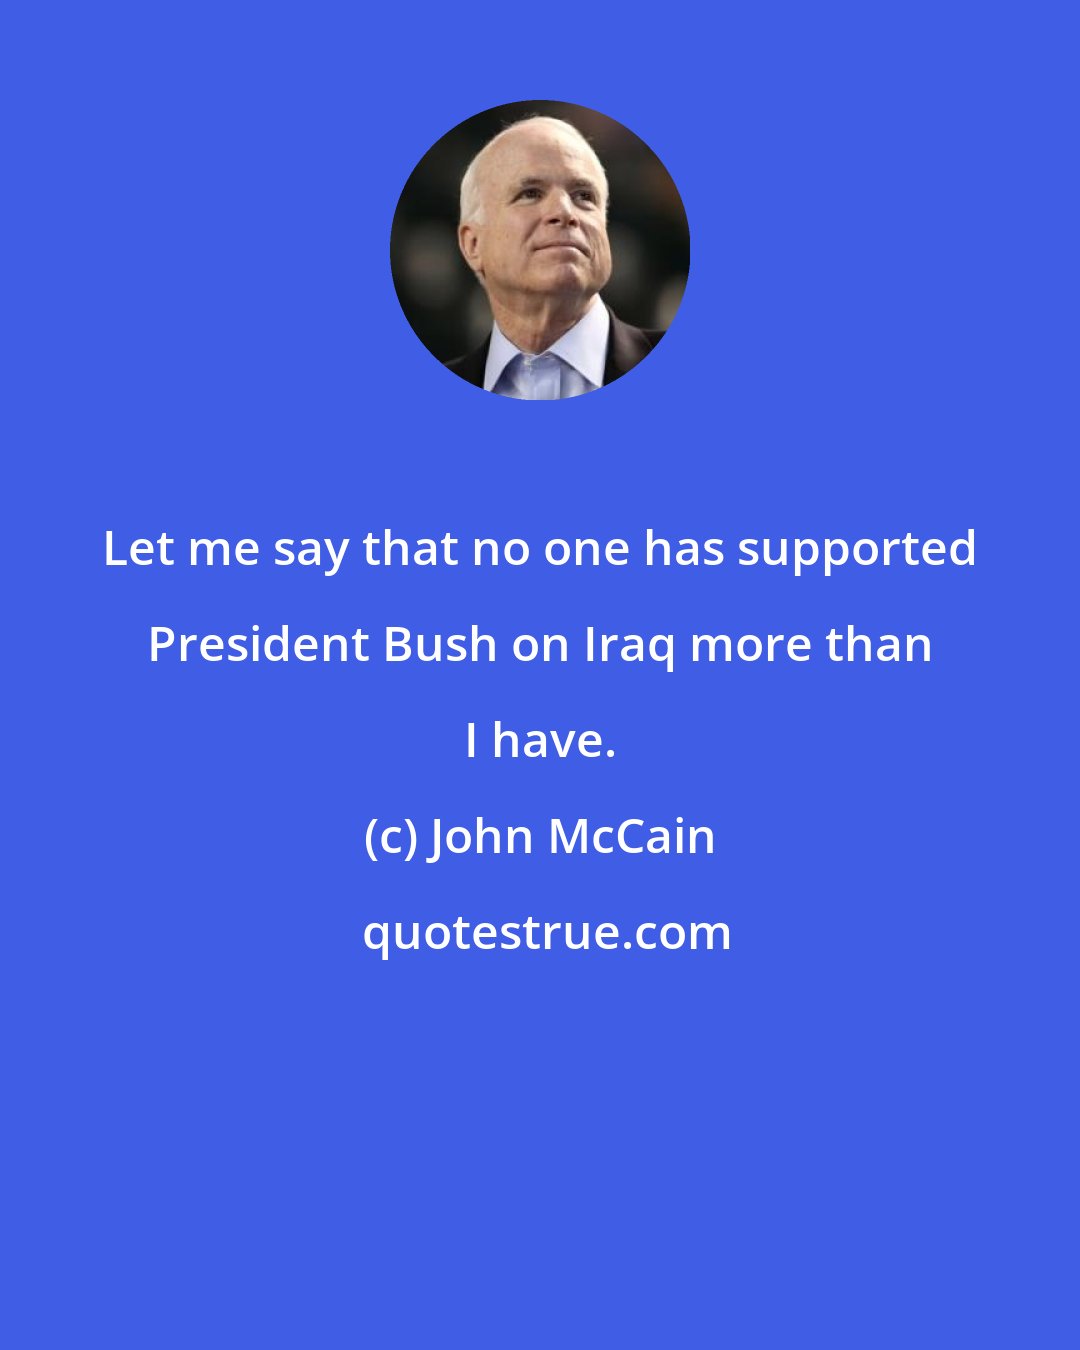 John McCain: Let me say that no one has supported President Bush on Iraq more than I have.